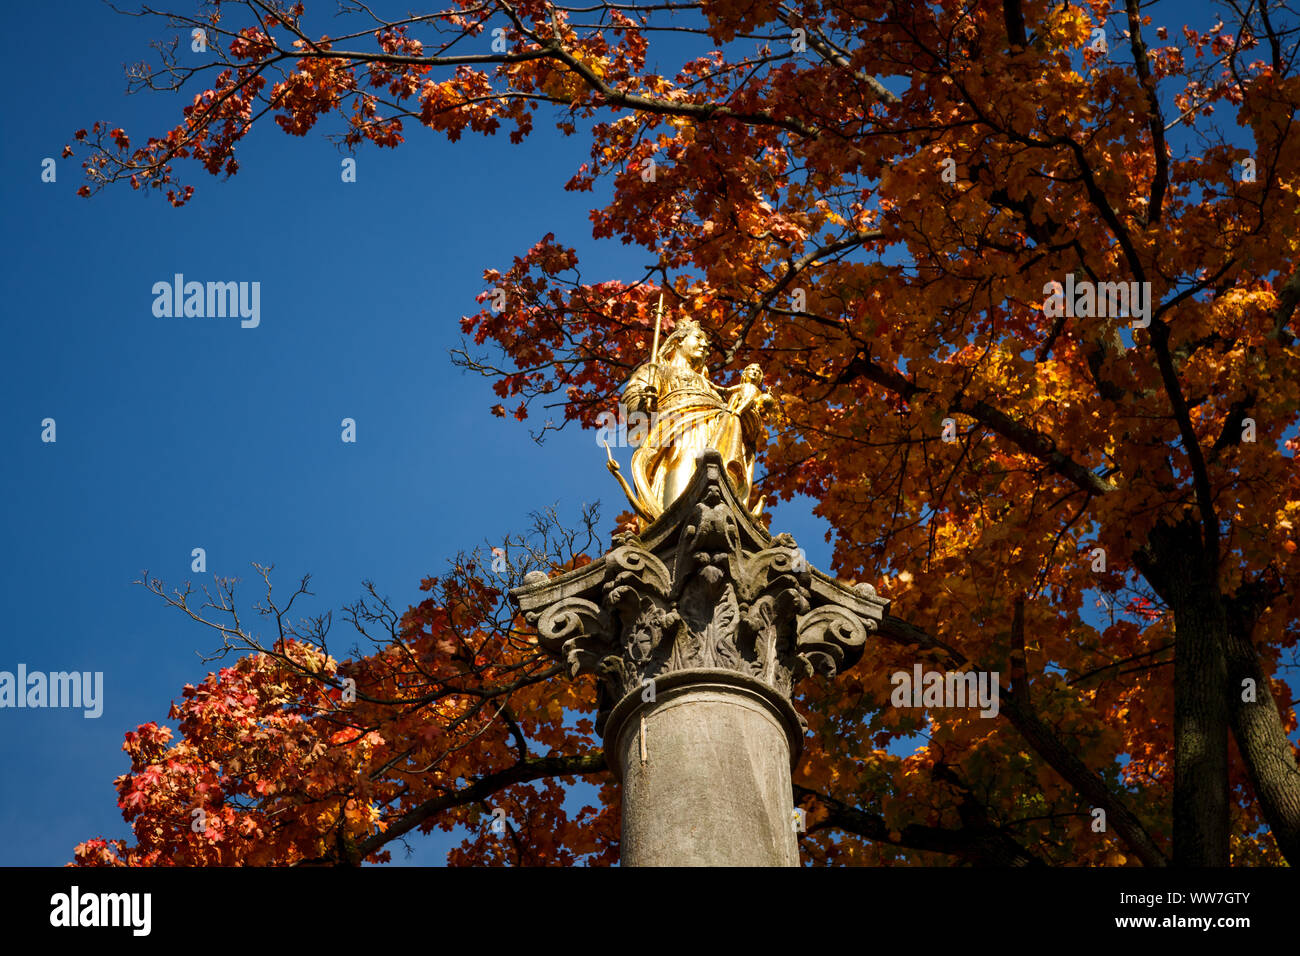 A golden statue of the Virgin Mary under blue sky in autumn, low angle view Stock Photo